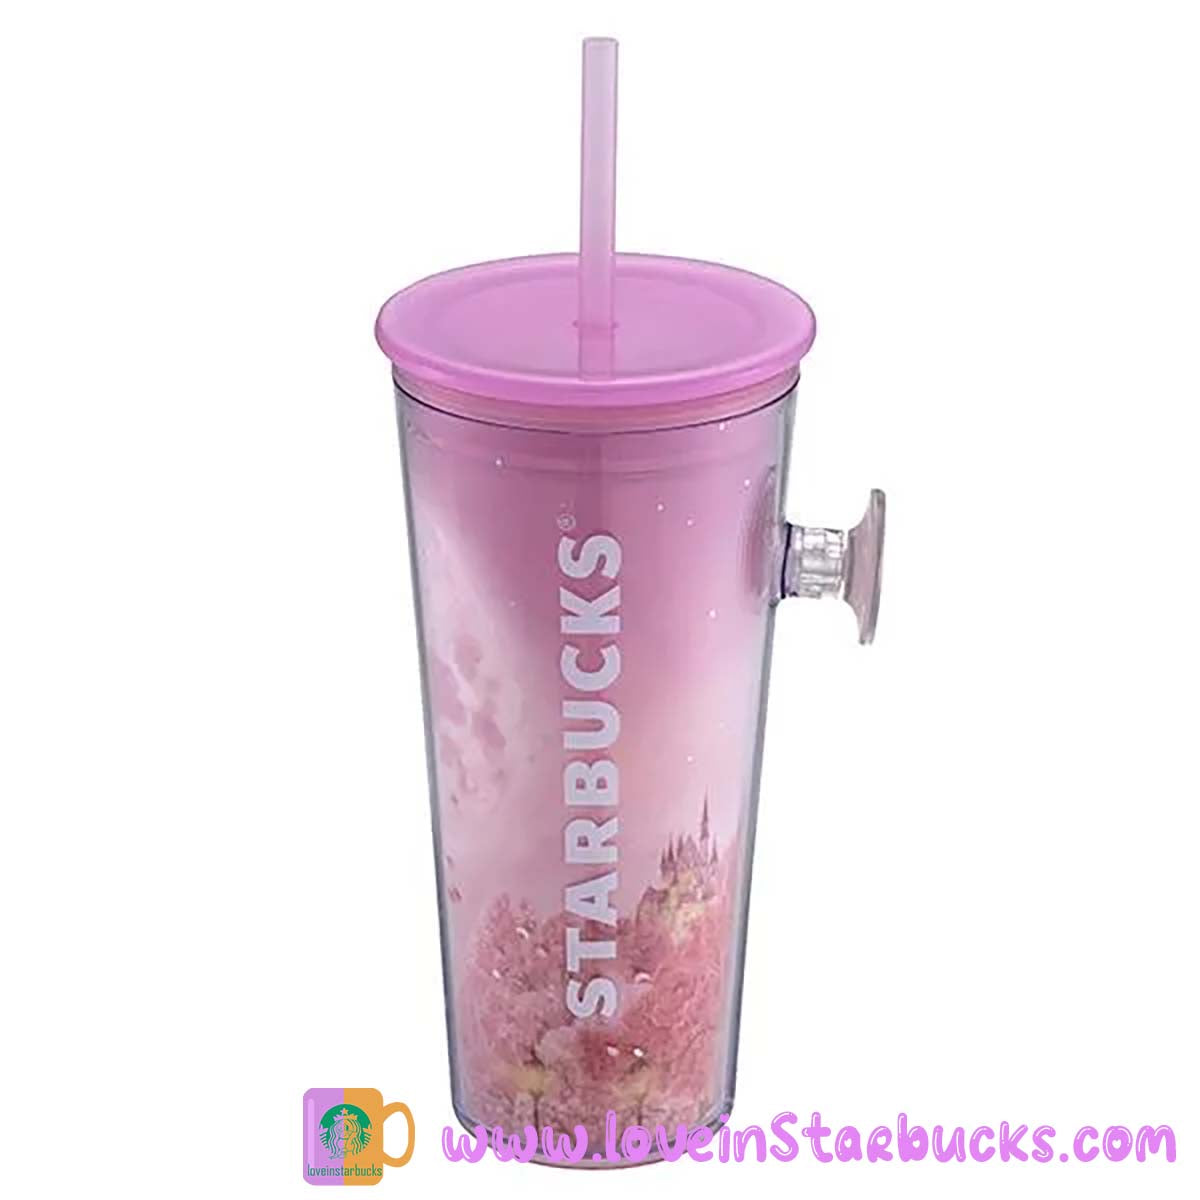 Cherry blossom Pink Cold Cup Starbucks Tumbler